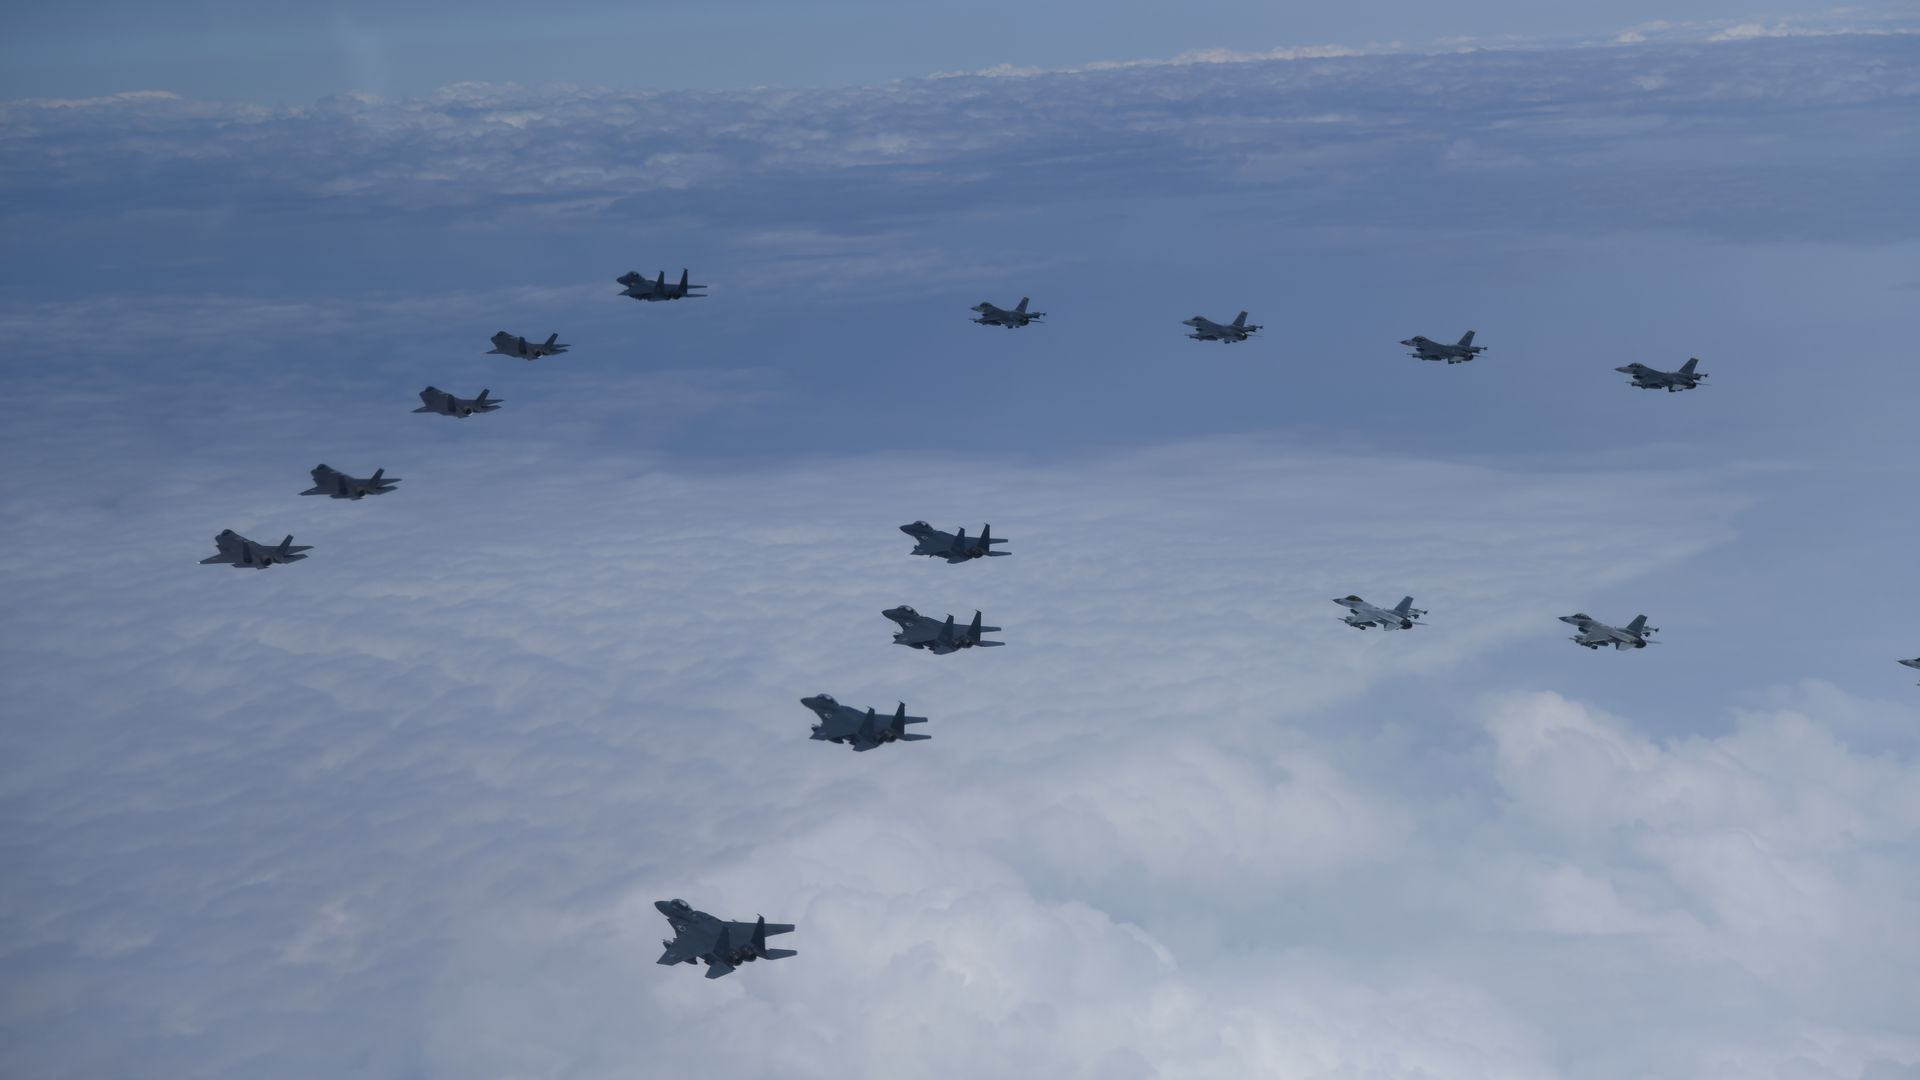  U.S. and South Korea fighter jets fly over the Korean Peninsula in response to North Korea's missile tests, on June 07, 2022 at an undisclosed location.